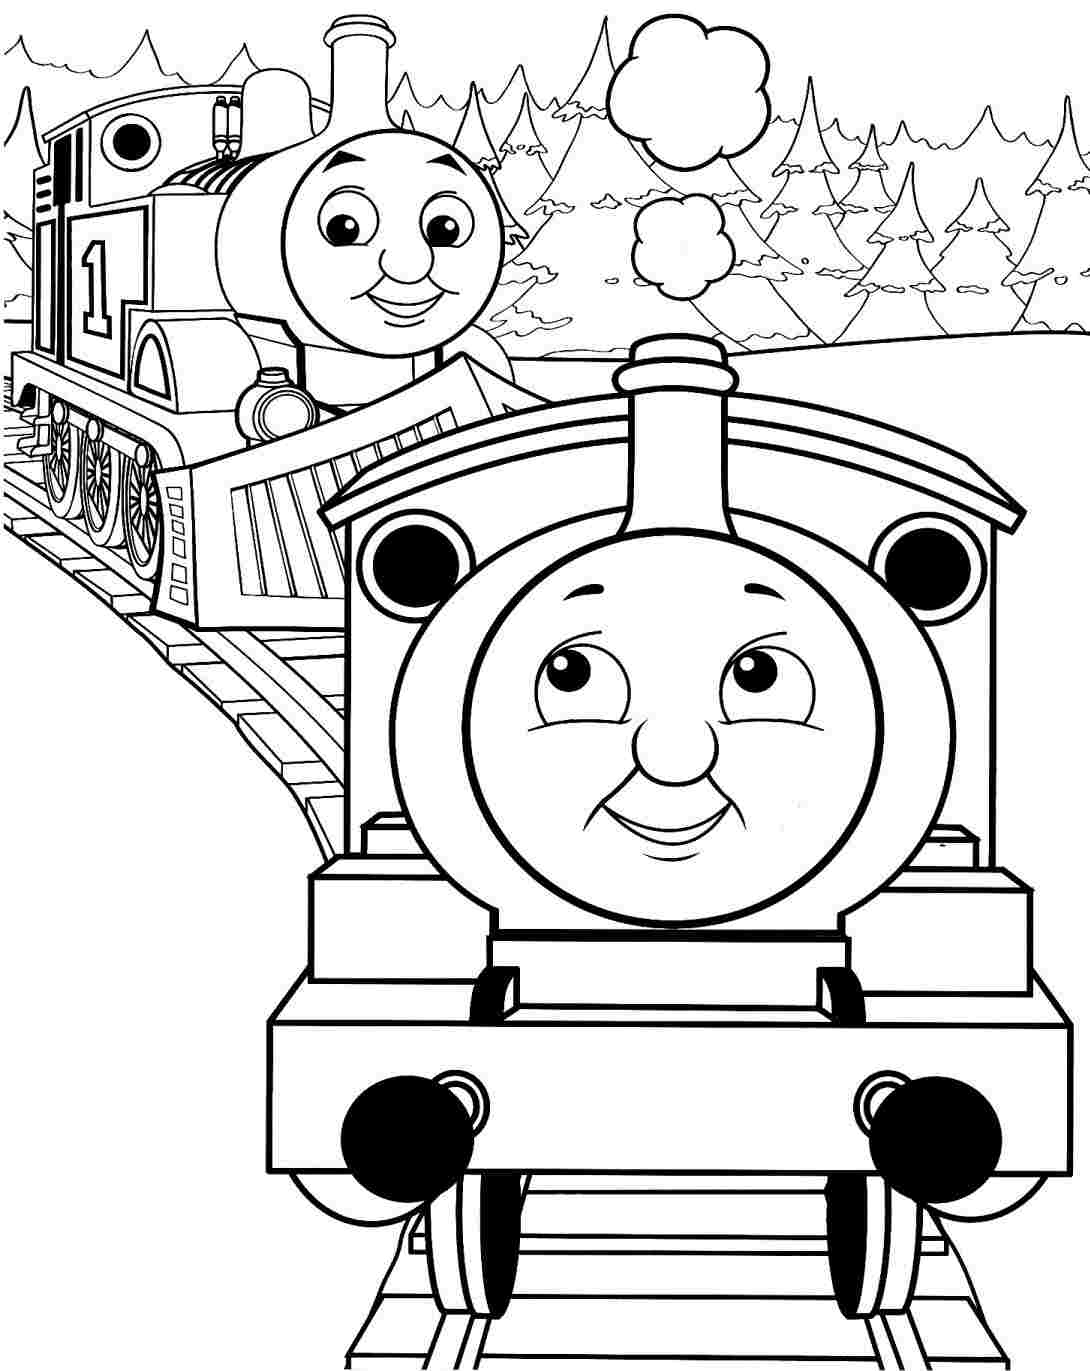 Cartoon Train Coloring Pages at GetColorings.com | Free printable ...